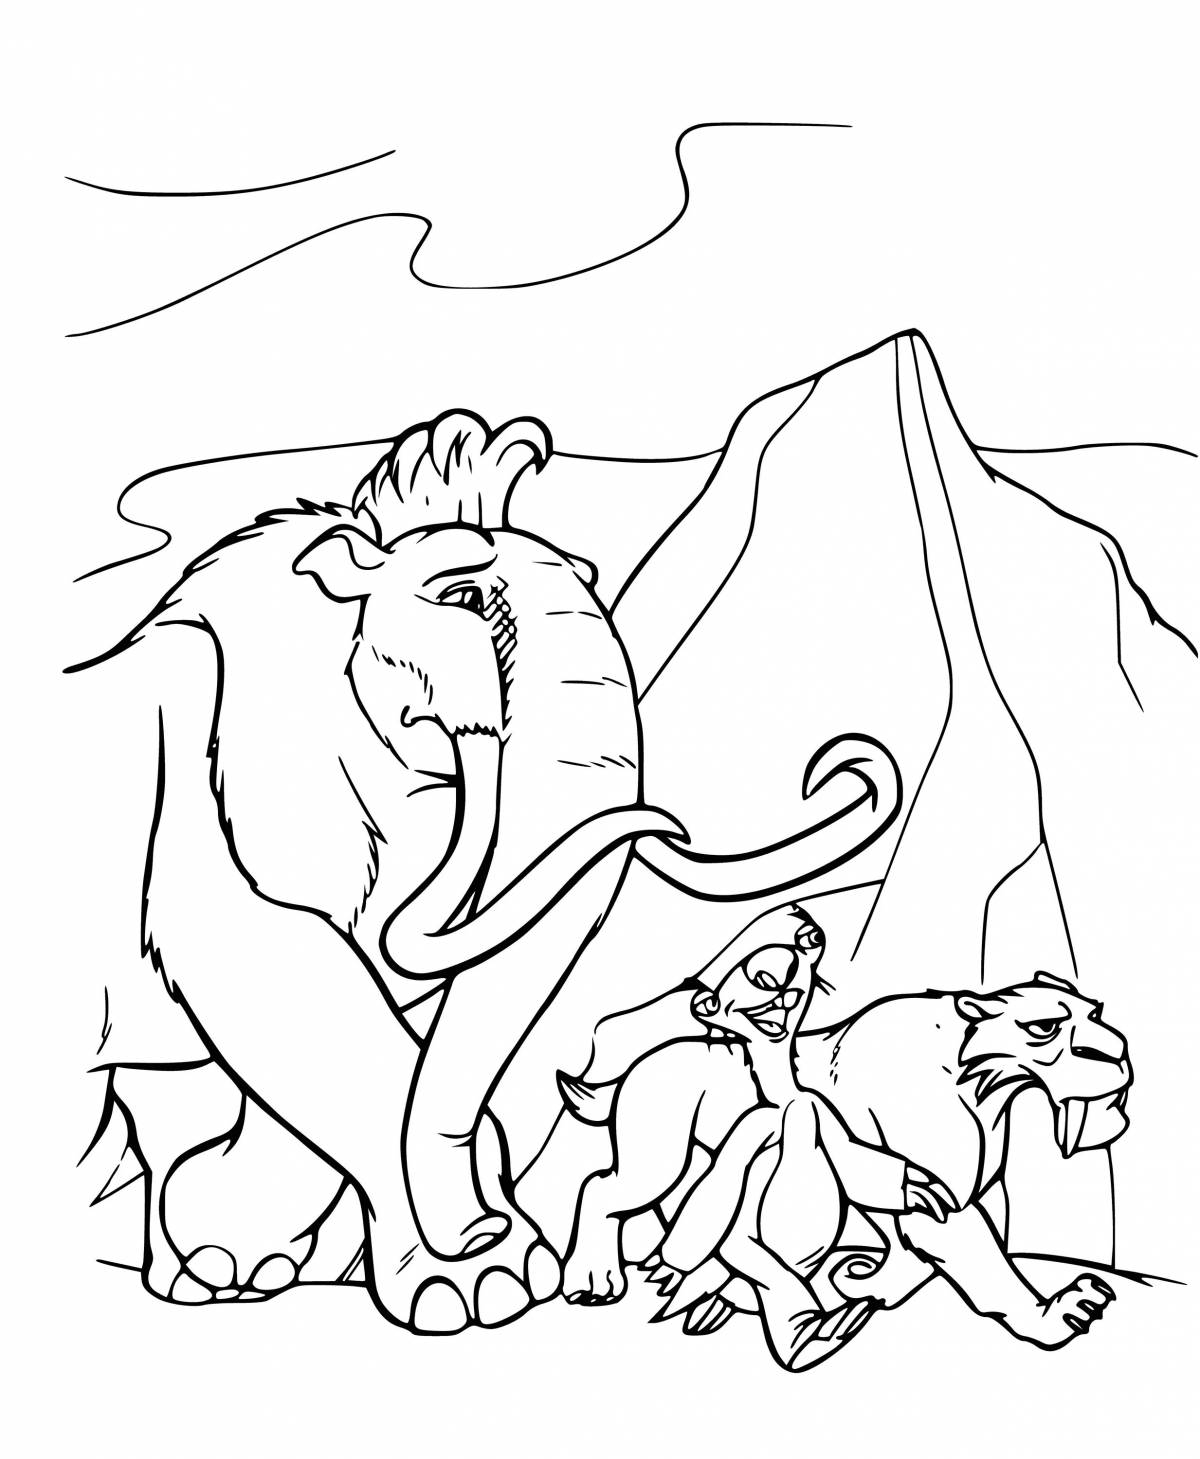 Diego ice age animated coloring page